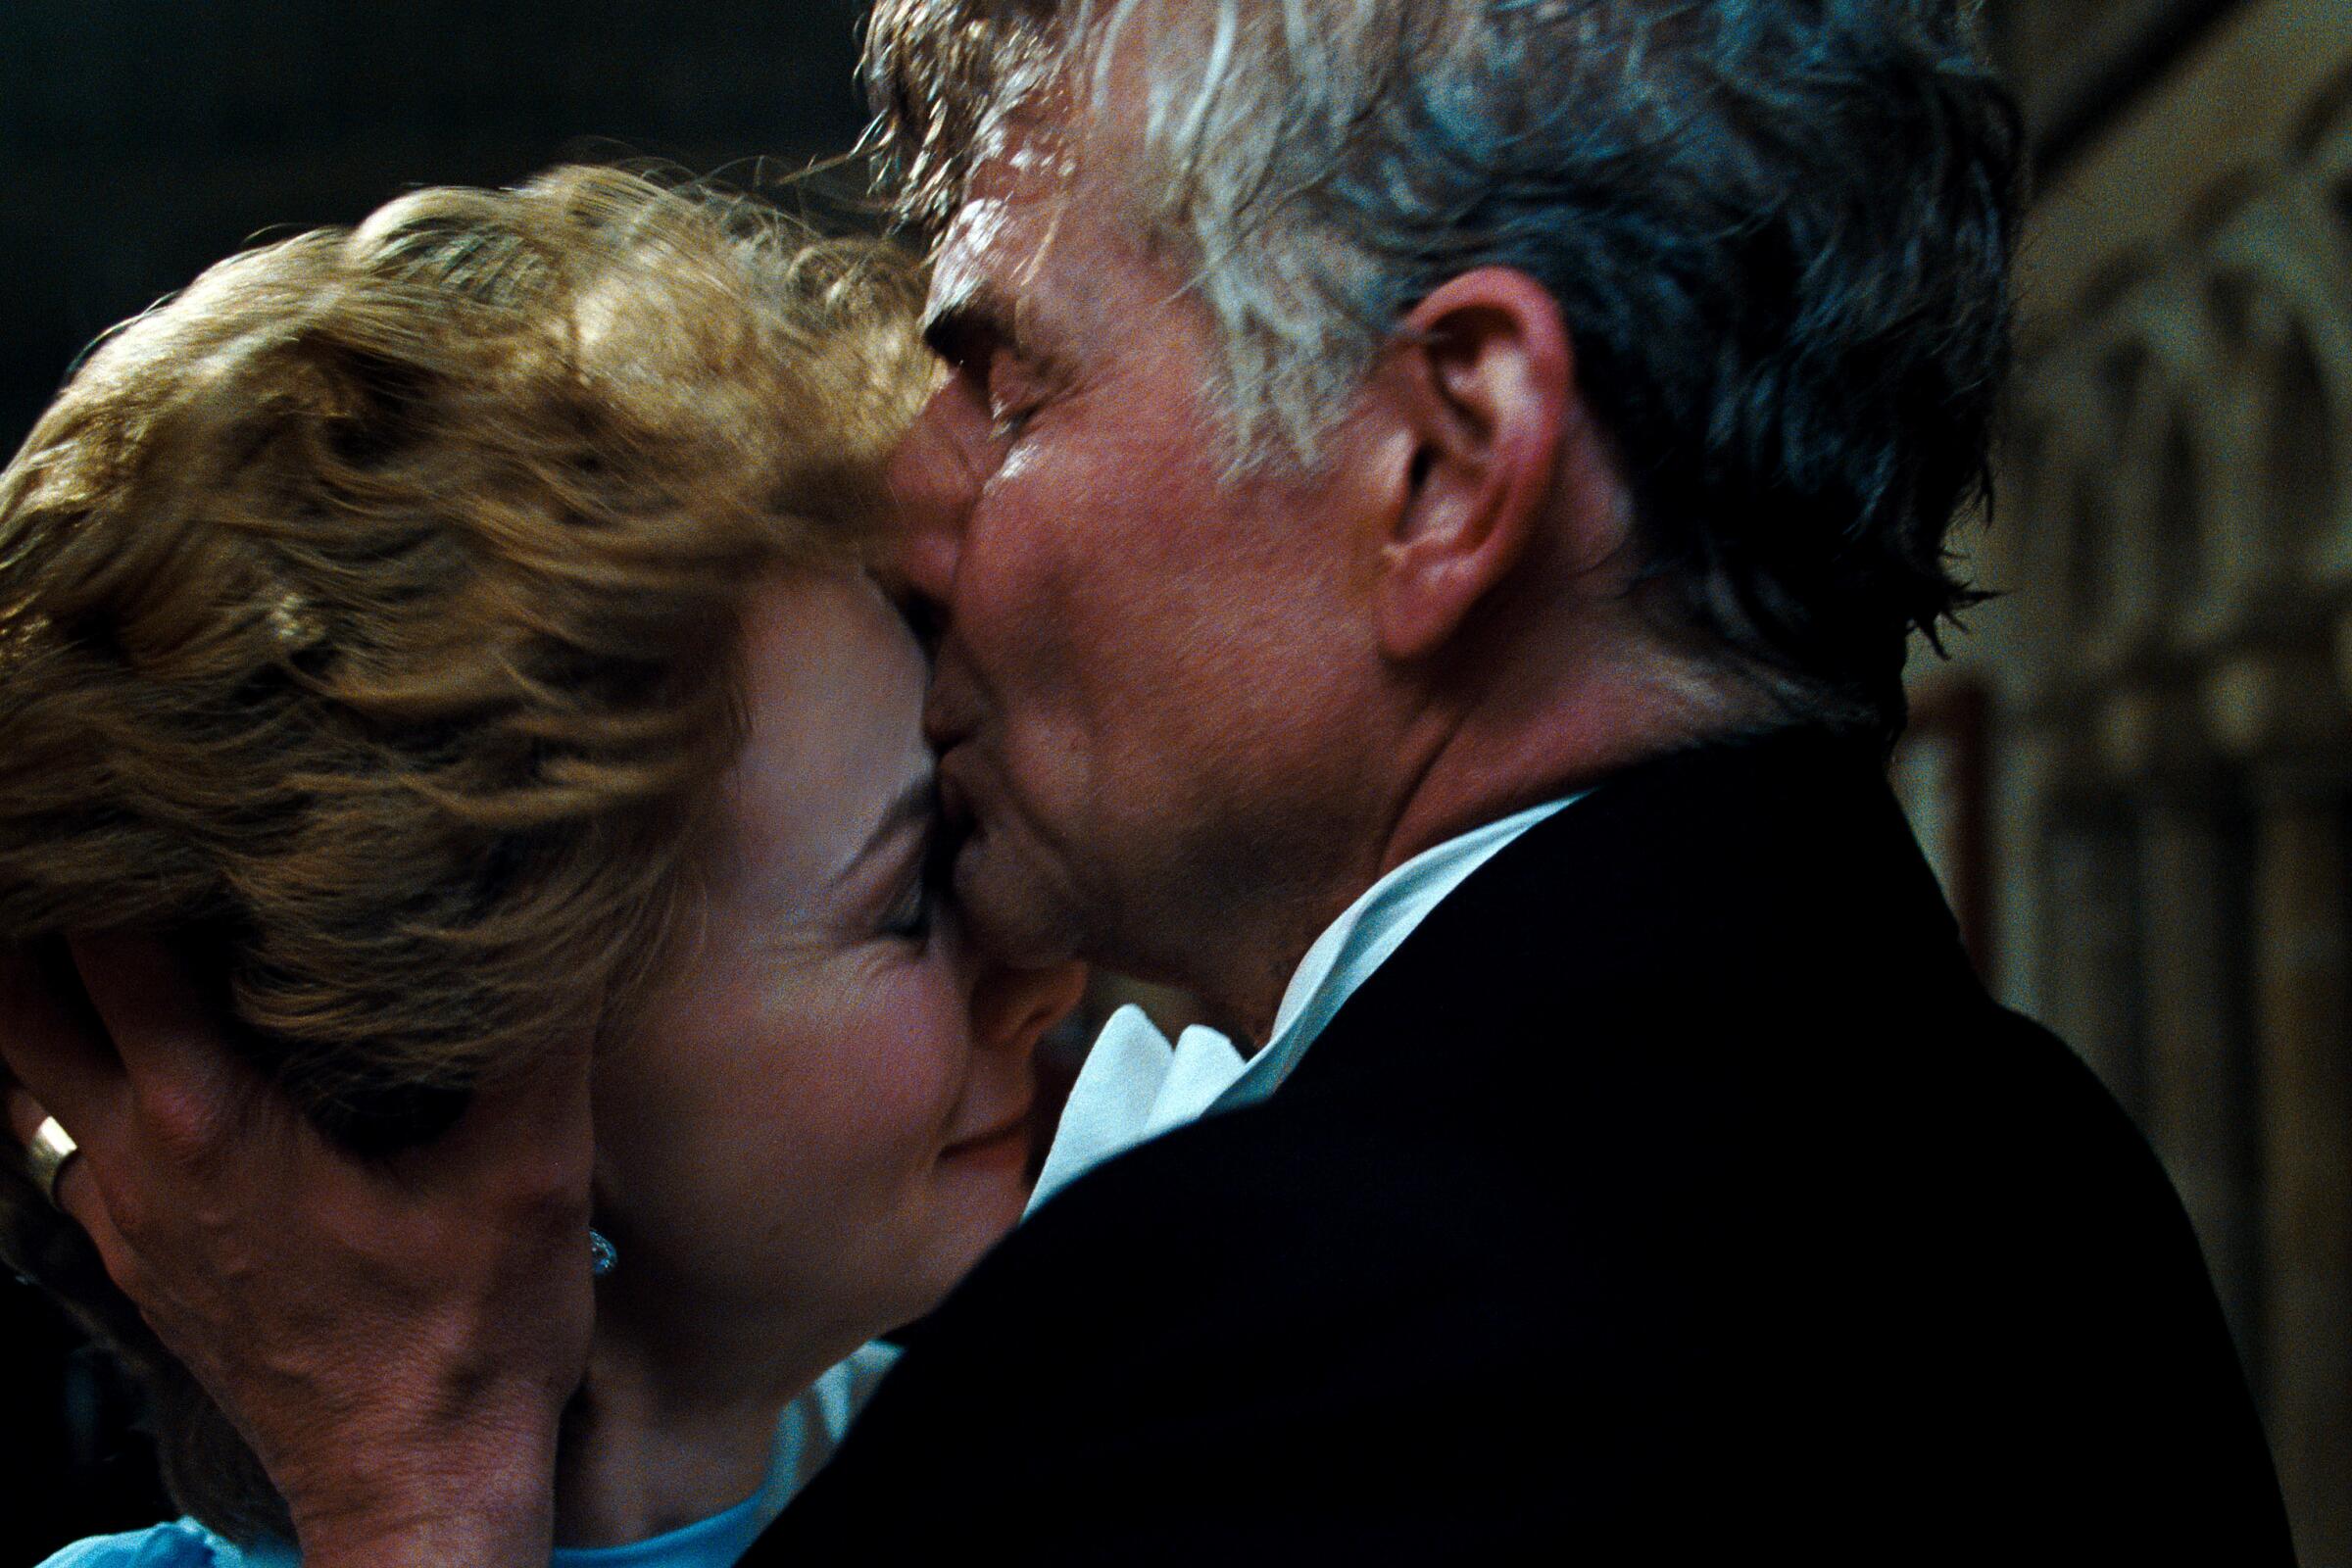 A man and woman embrace as he kisses her forehead in a scene from "Maestro."